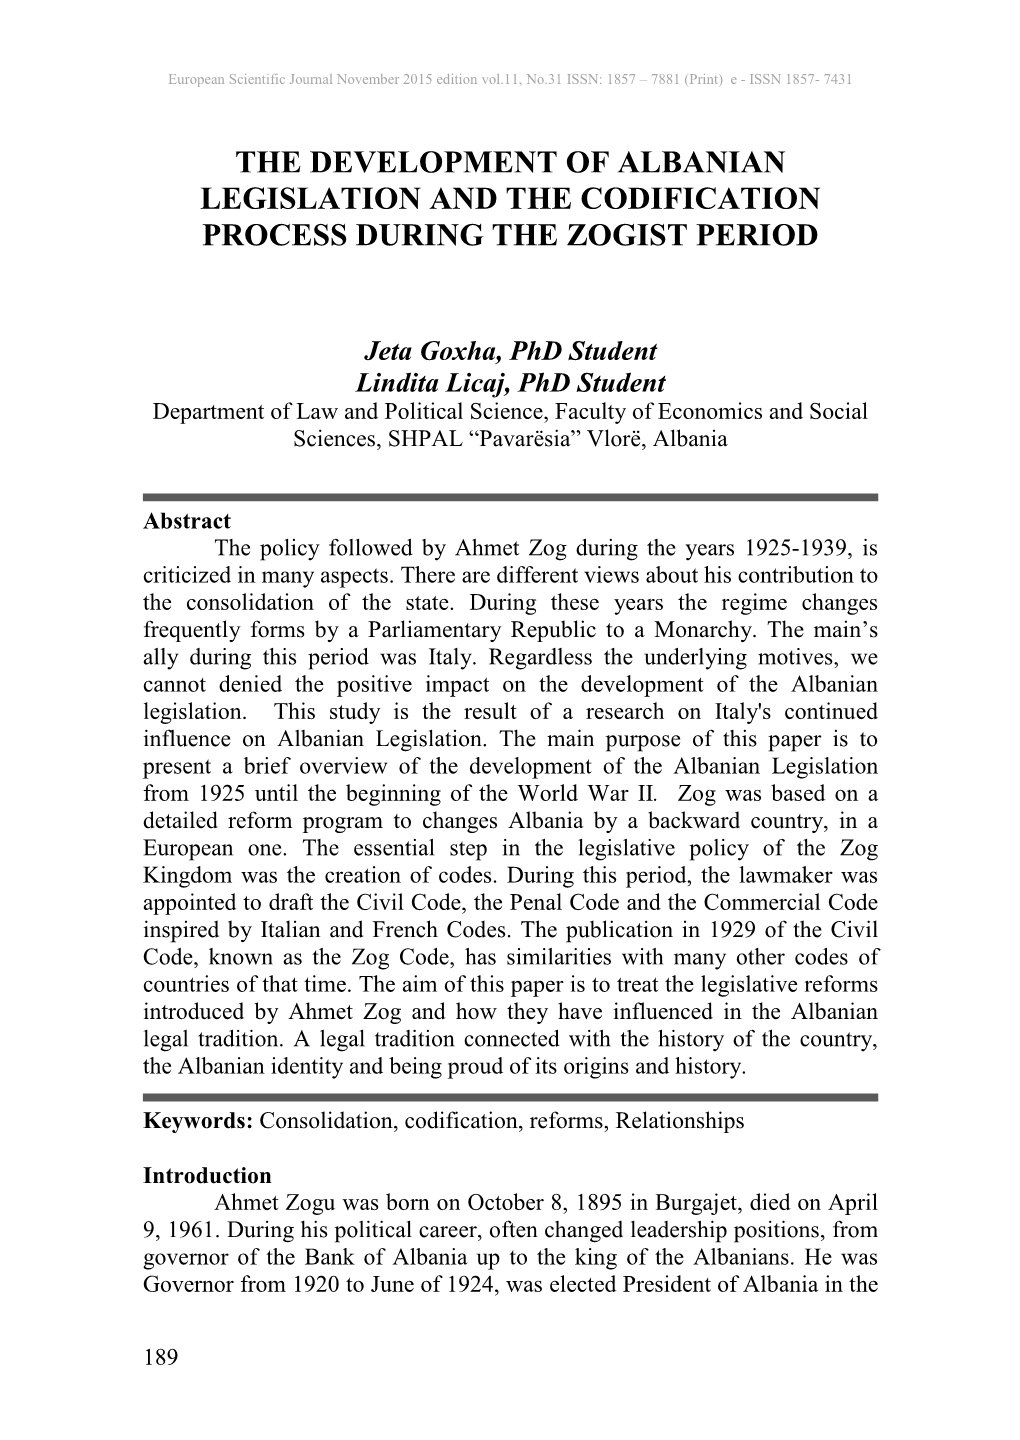 The Development of Albanian Legislation and the Codification Process During the Zogist Period